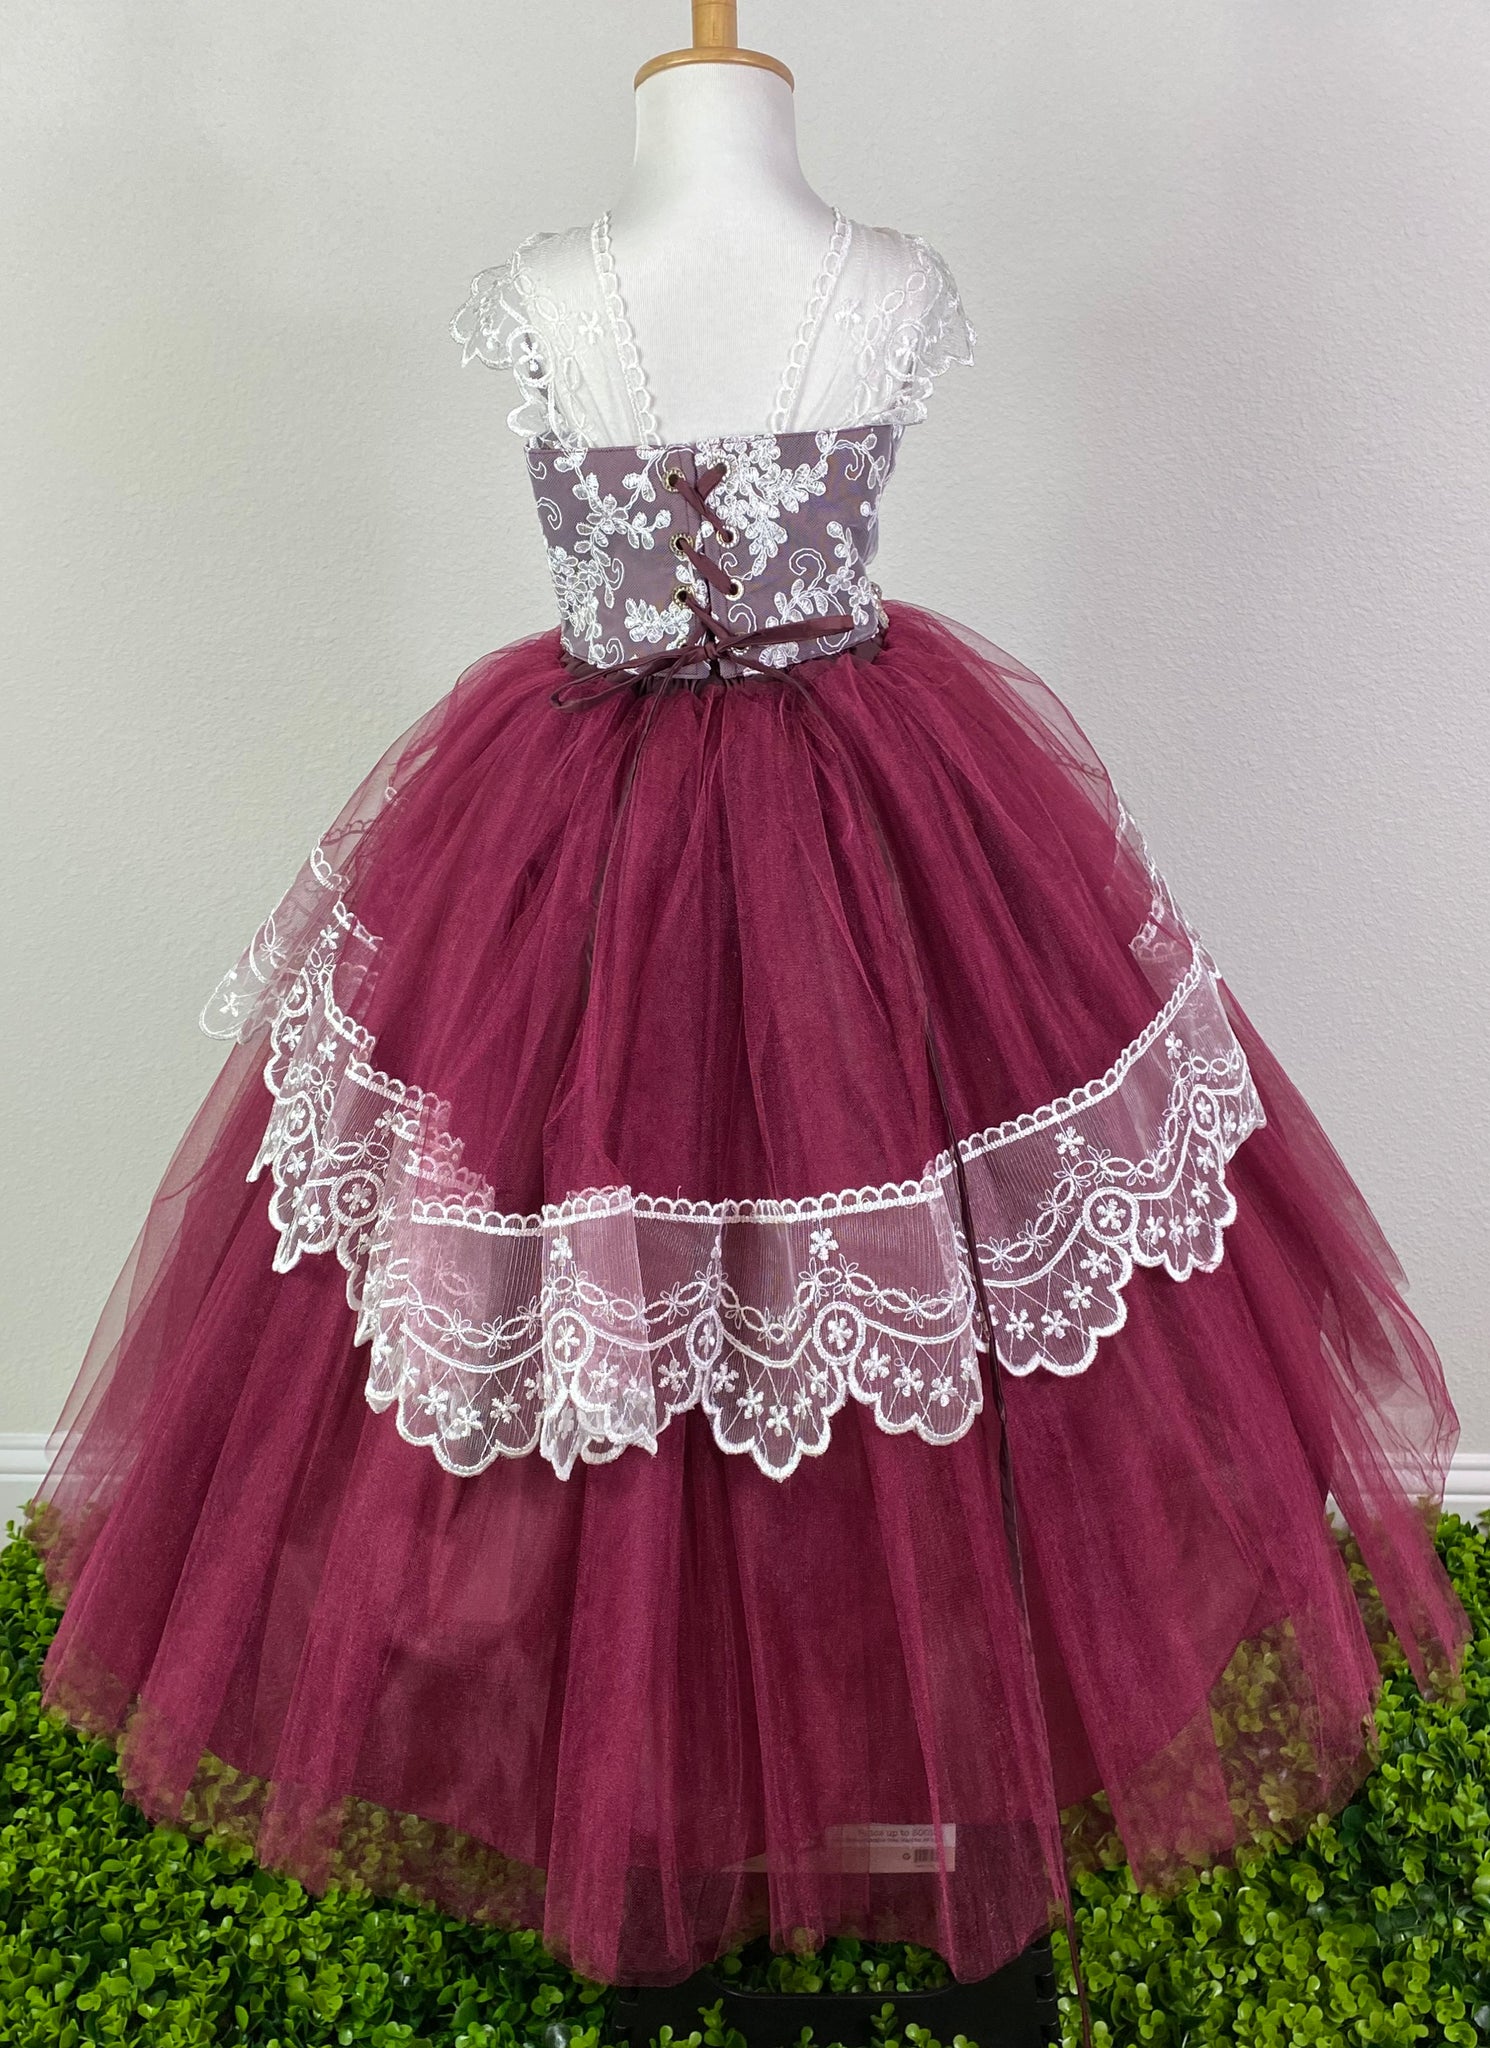 Burgundy, Blush, Sky-blue, or Rose bodice with white embroidered lace overlay Lace strap sleeves Swirled rhinestone blush band along lower bodice Satin and tulle skirting with embroidered ruffled detailing through center Corset back with jeweled eyelets Dress pictured with a petticoat Petticoat not included  Choose from a tulle, cloth, or wire for best look